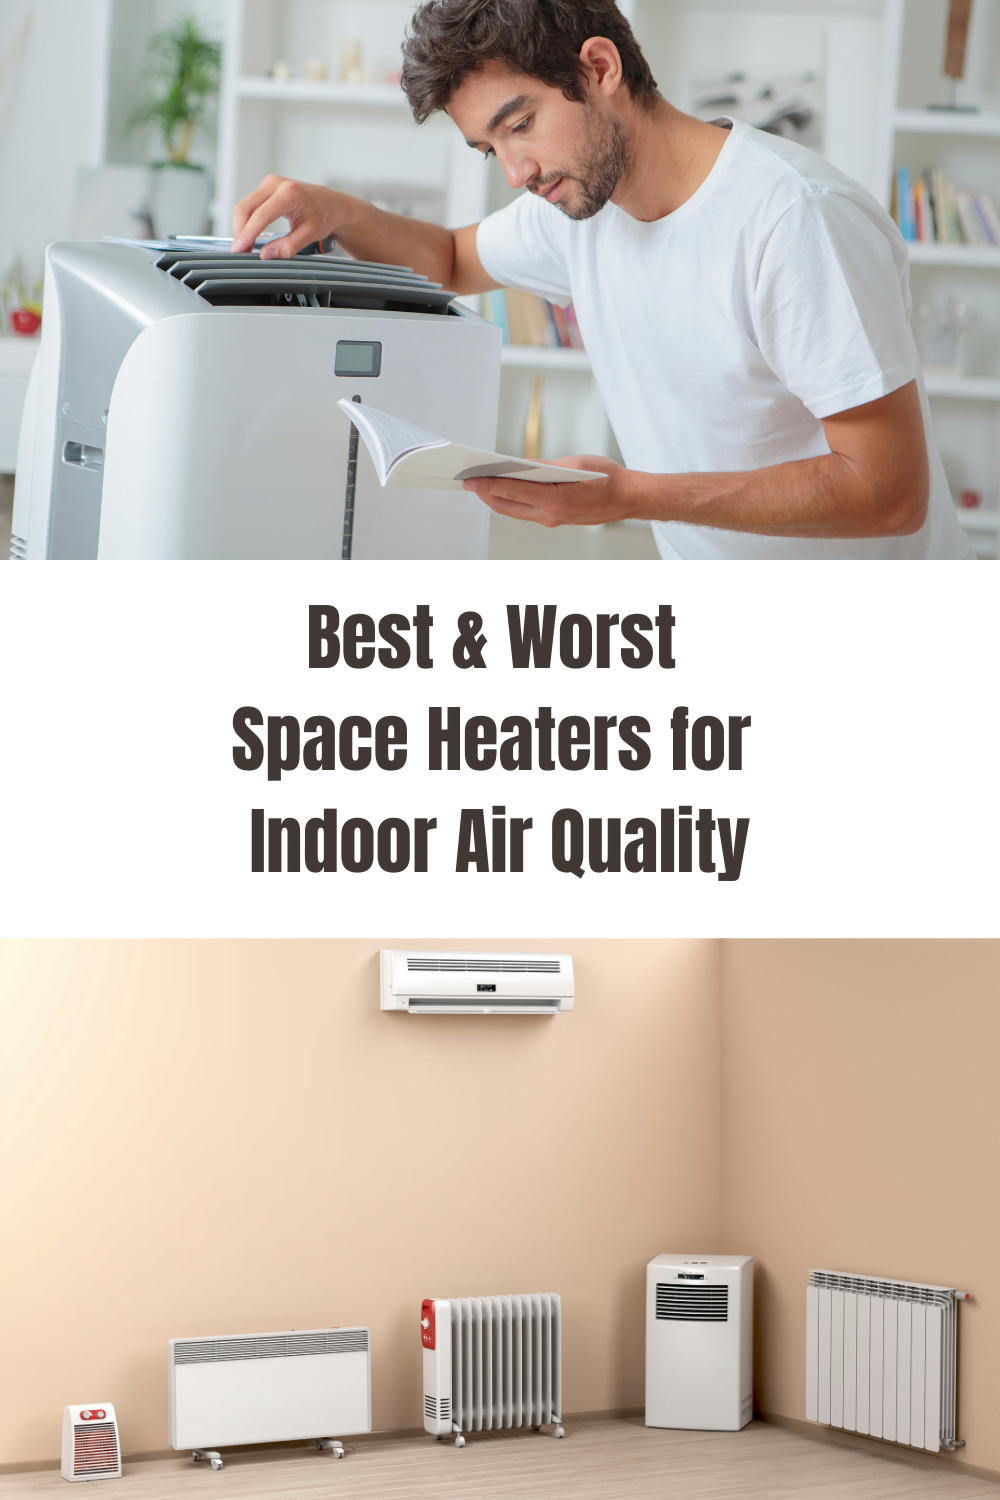 Best & Worst Space Heaters for Indoor Air Quality 1